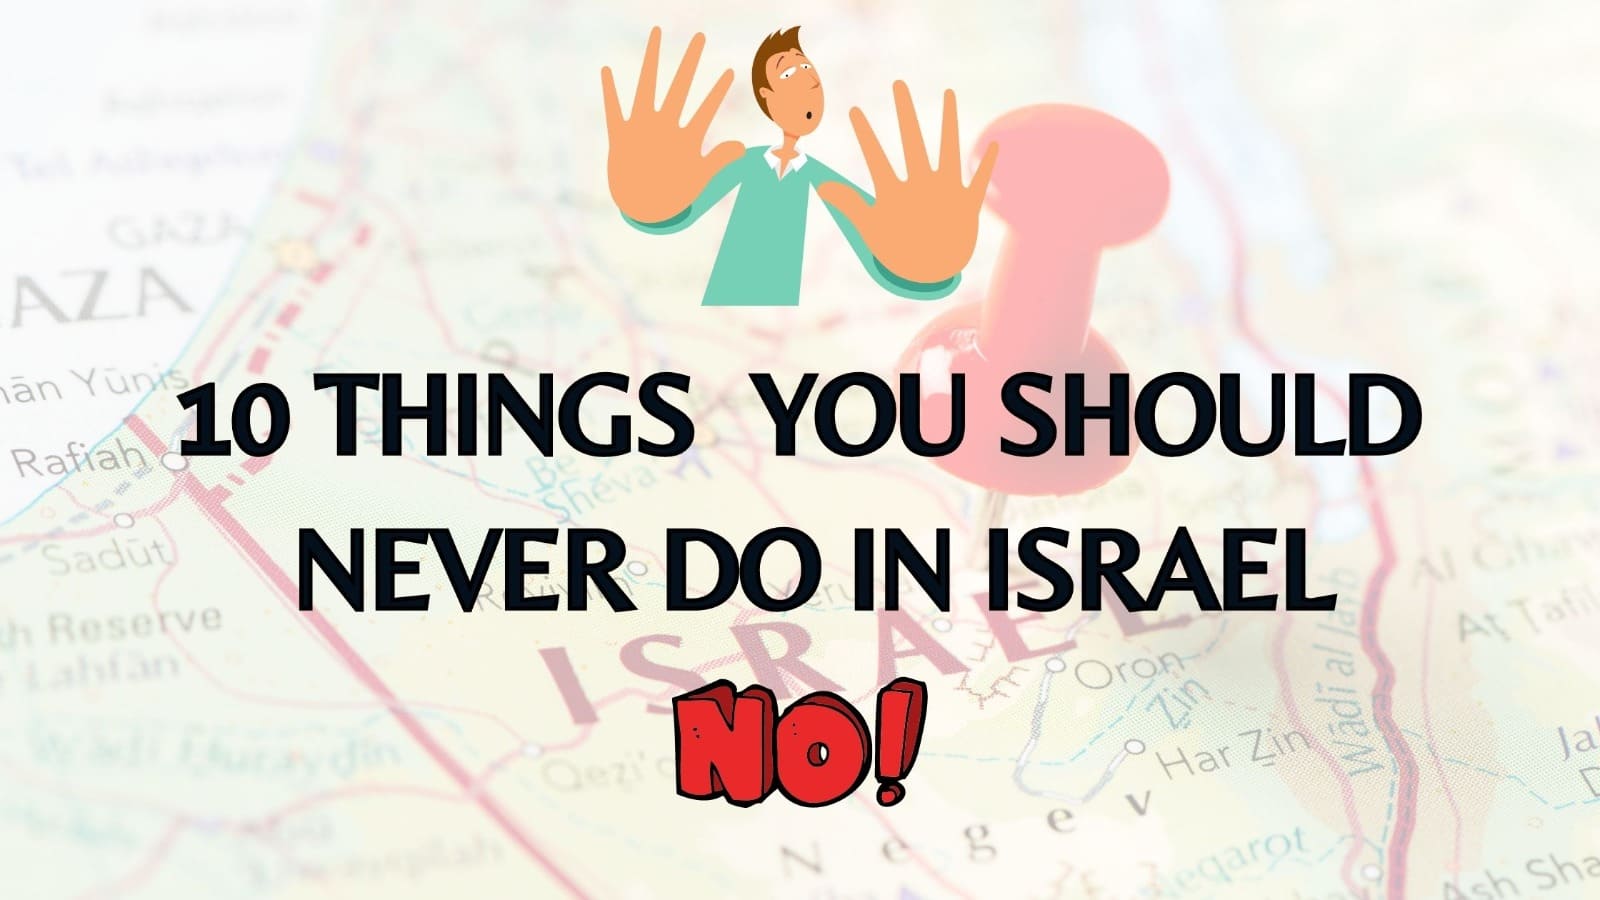 While planning Israel Itinerary, its essential to be aware of the country's restrictions & cultural codes during Kosher Travel to avoid any legal issues.